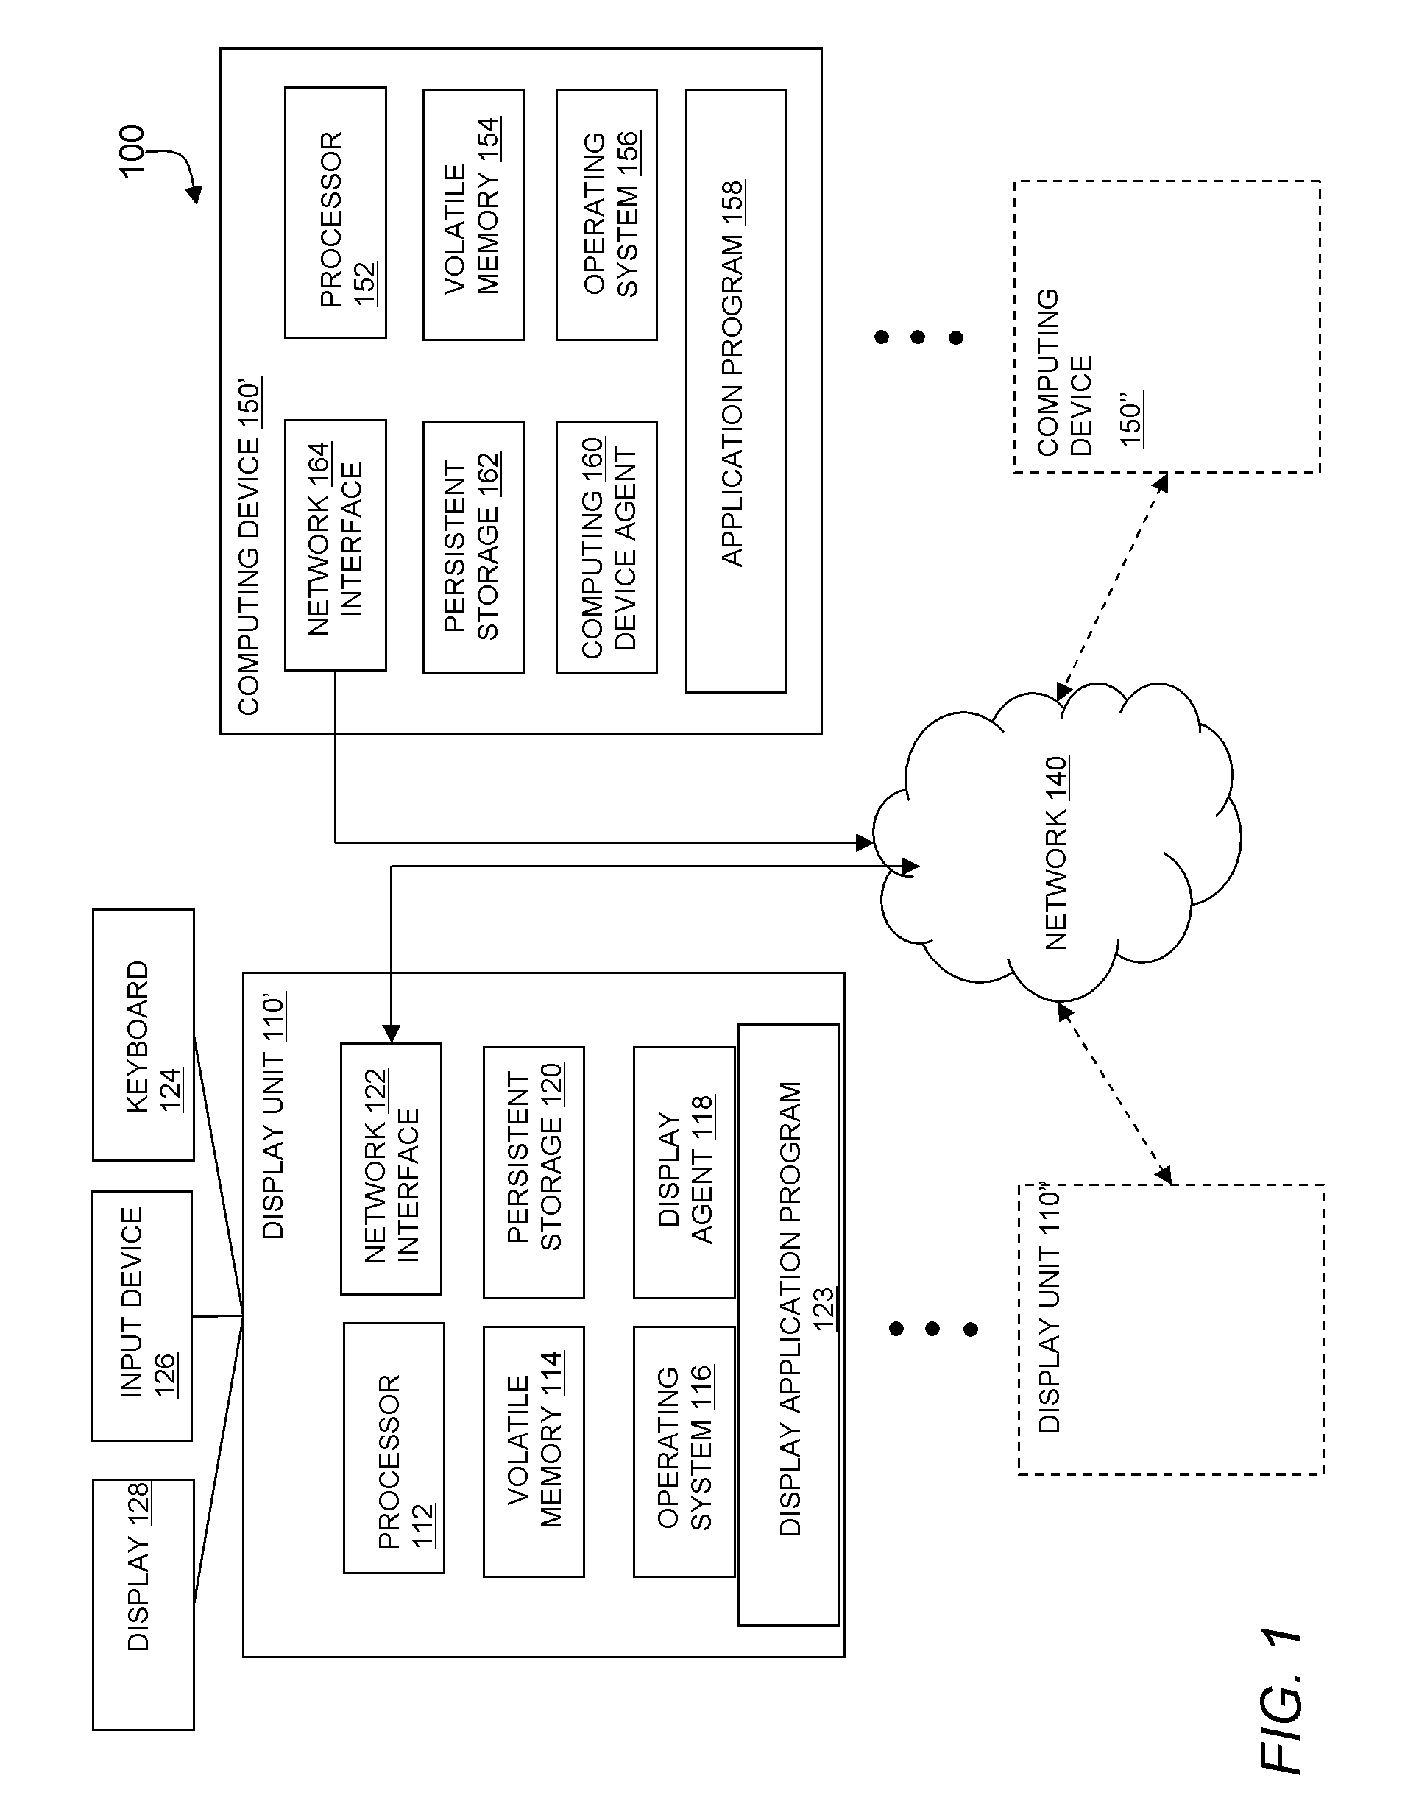 A method and apparatus for updating a graphical display in a distributed processing environment using compression